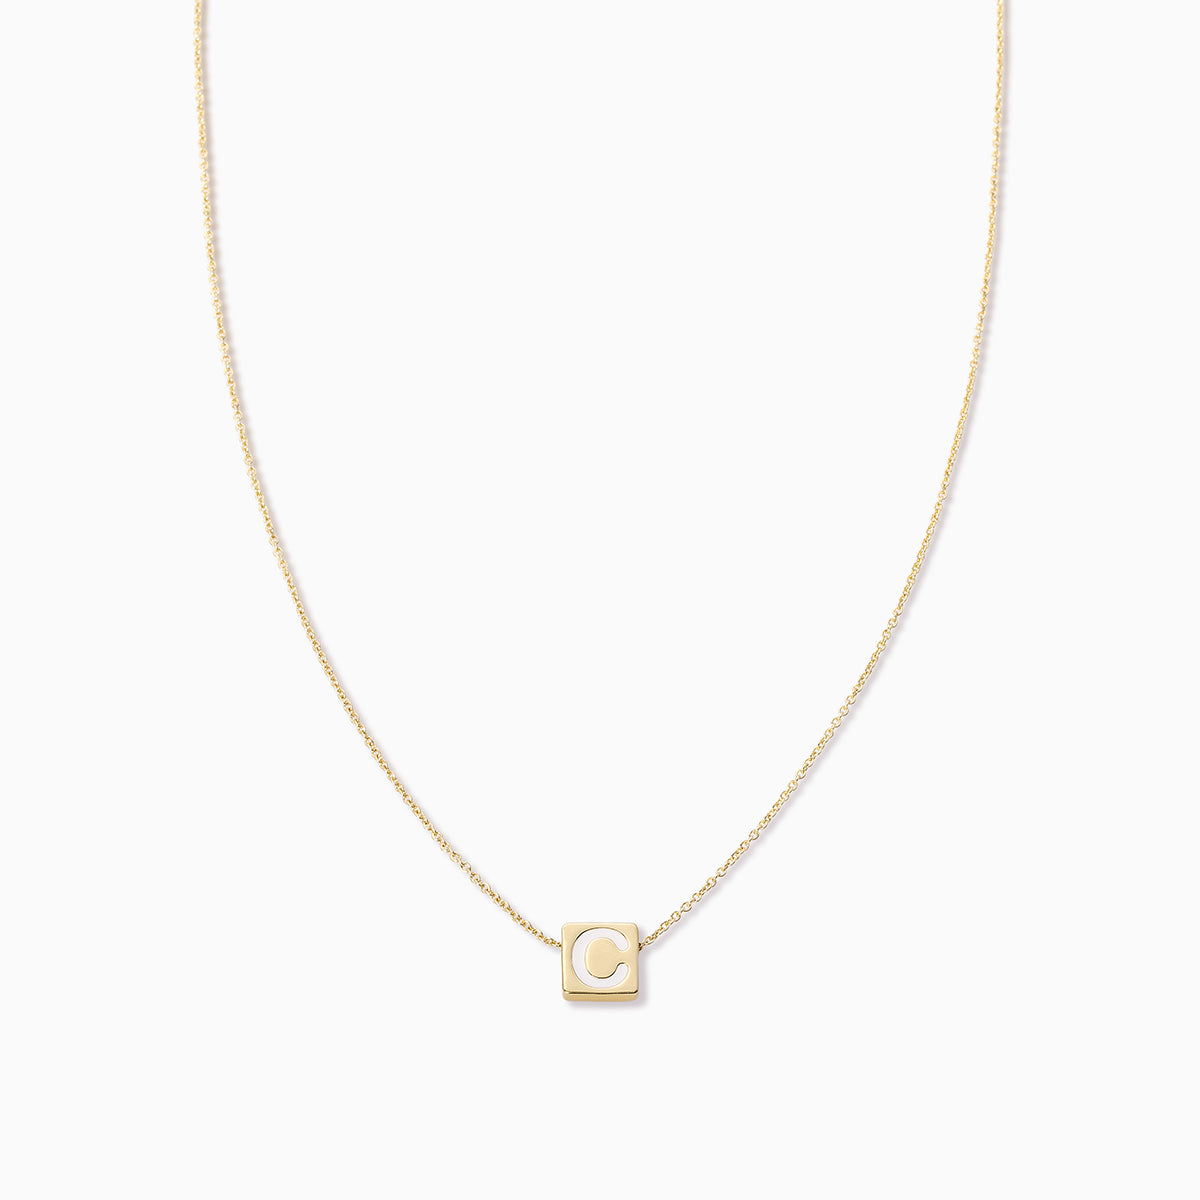 Bold Letter Necklace | Gold C | Product Image | Uncommon James